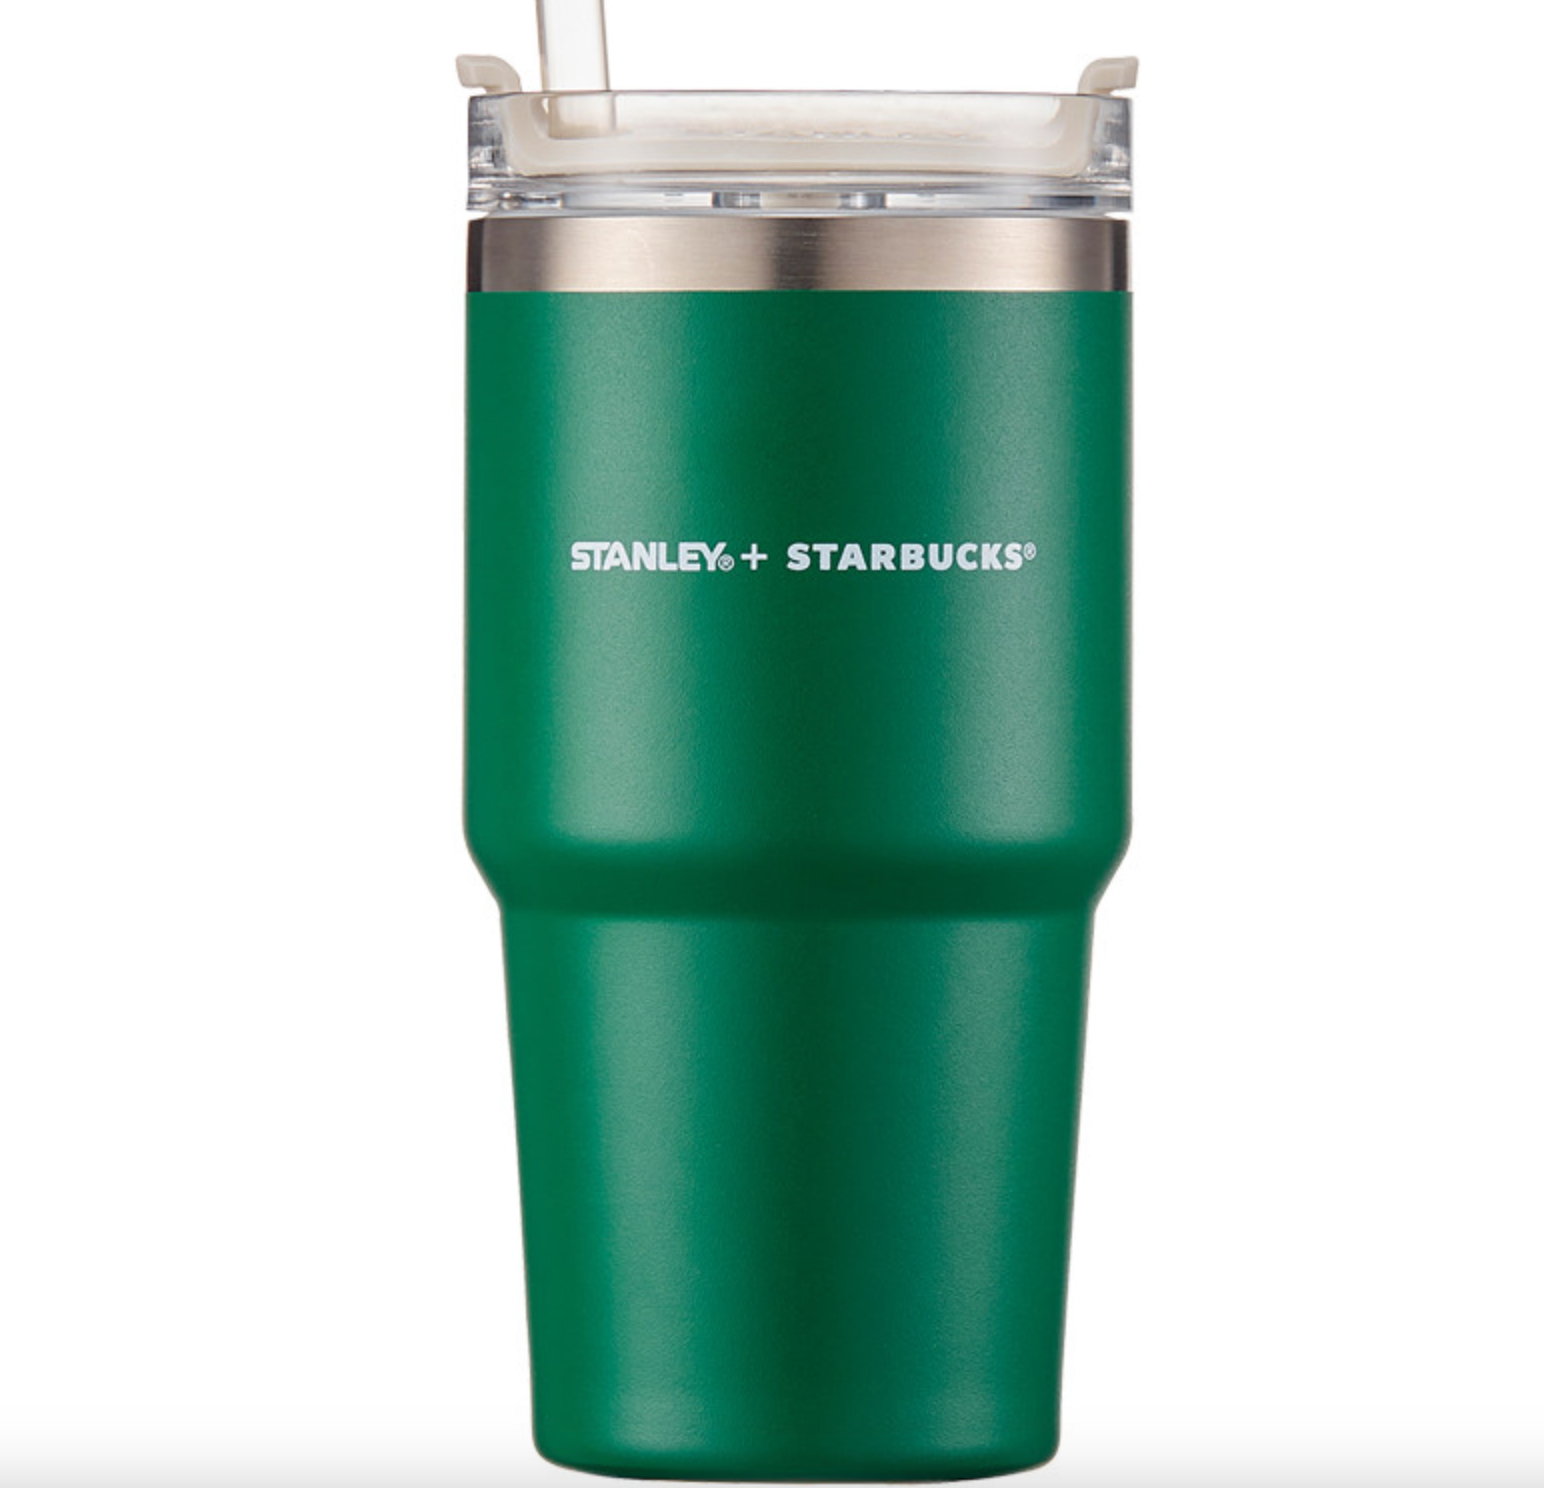 The Starbucks Stanley Cup 